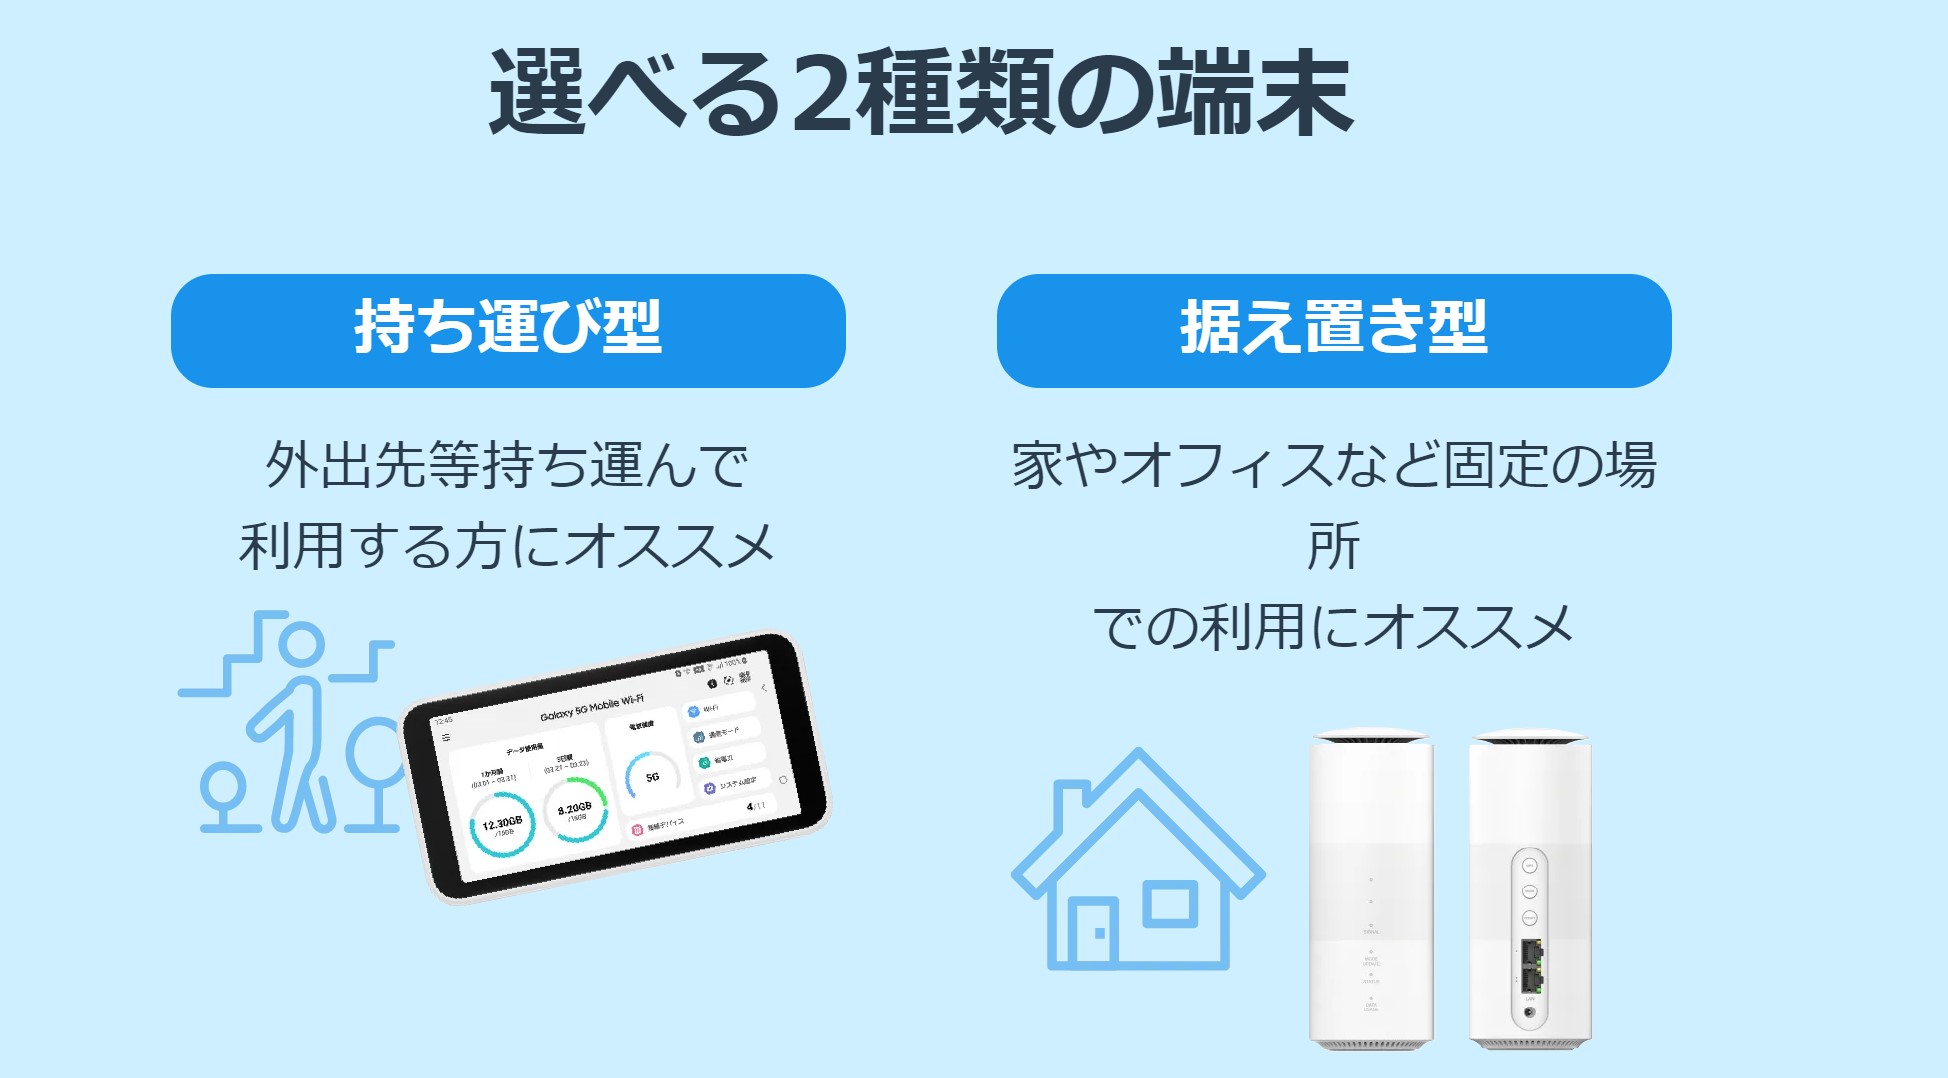 WiMAX9